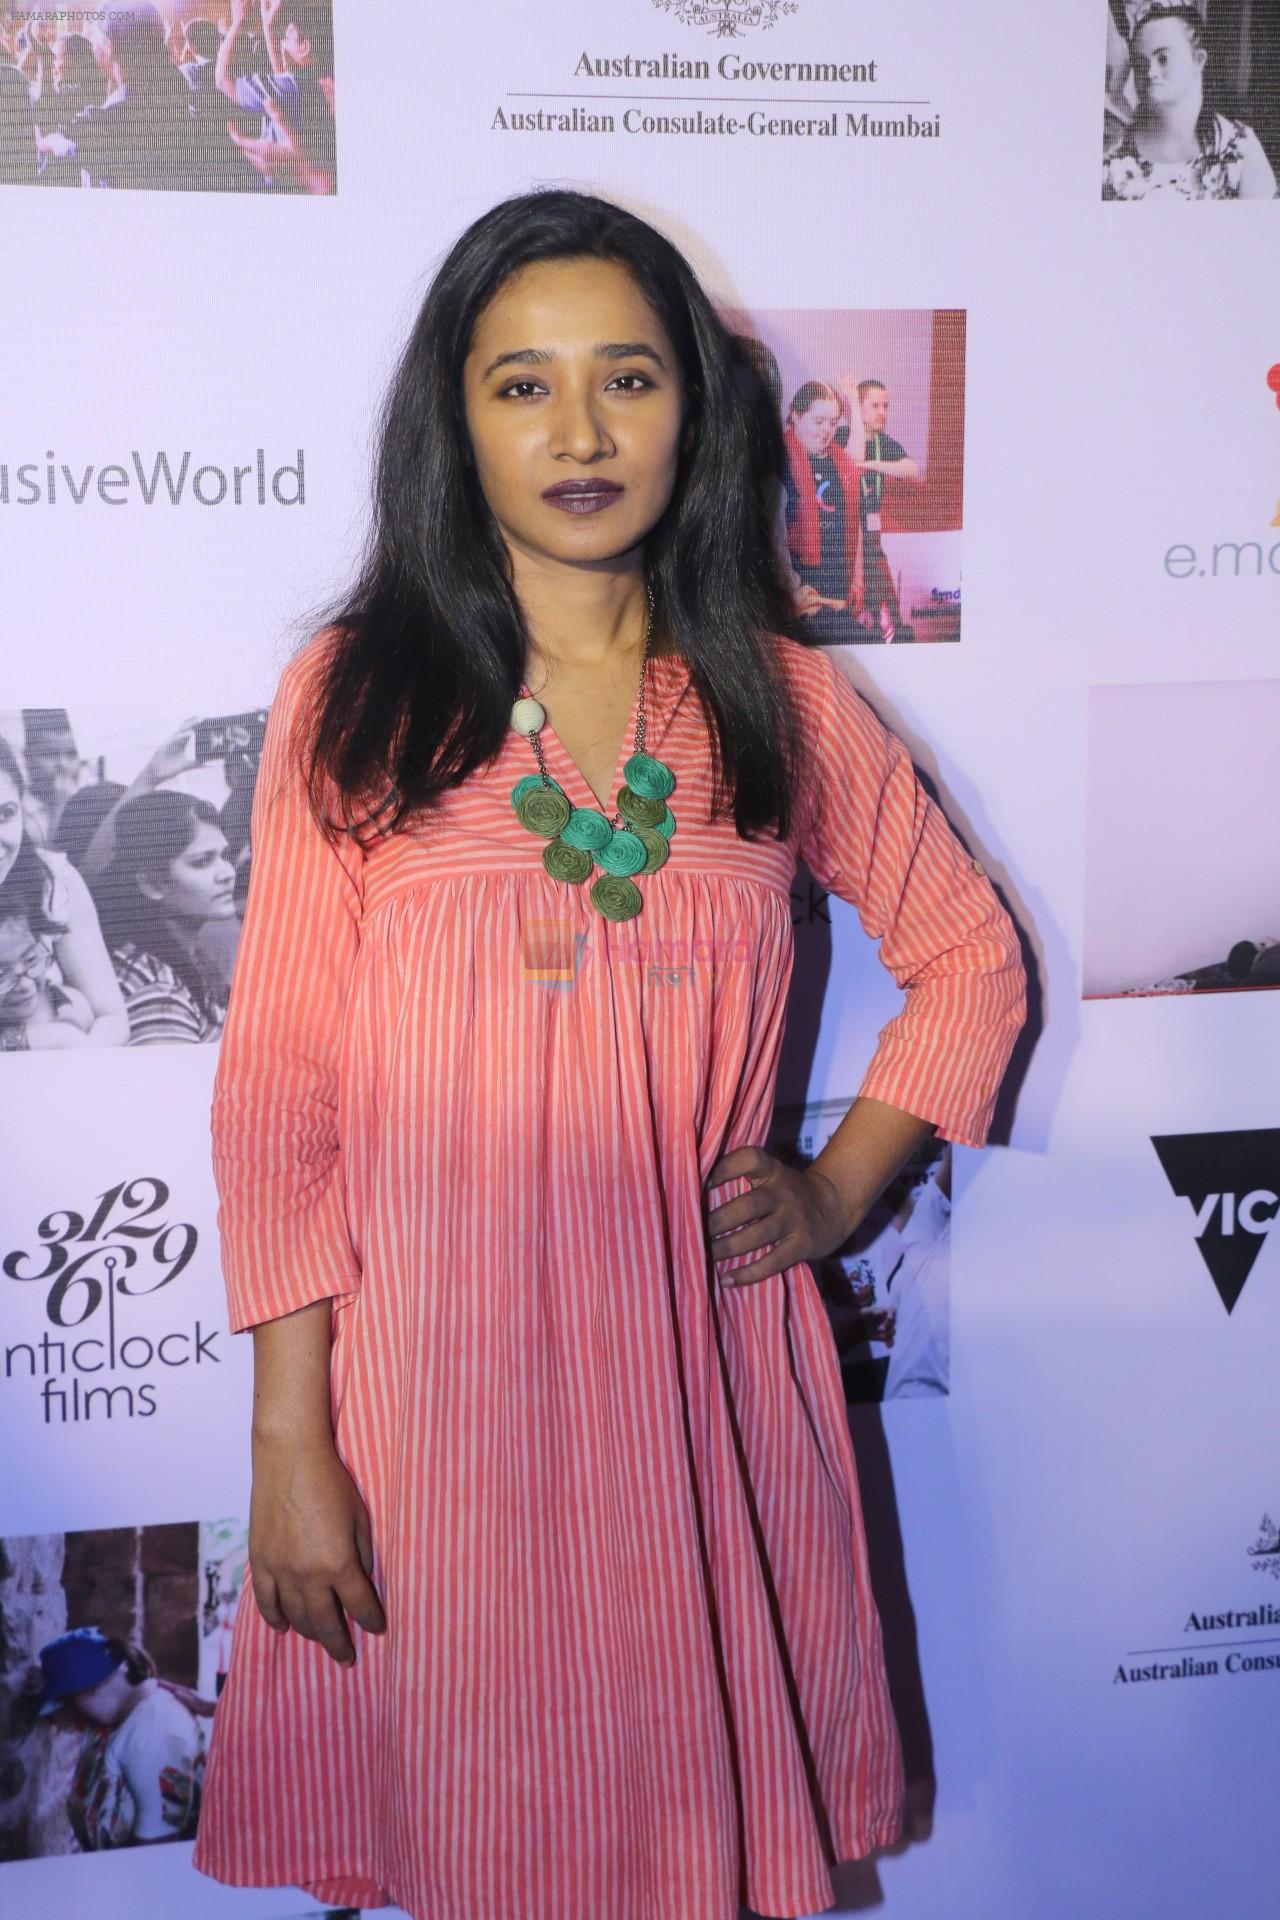 Tannishtha Chatterjee at the Screening Of Onir's Documentary On Kids With Down Syndrome